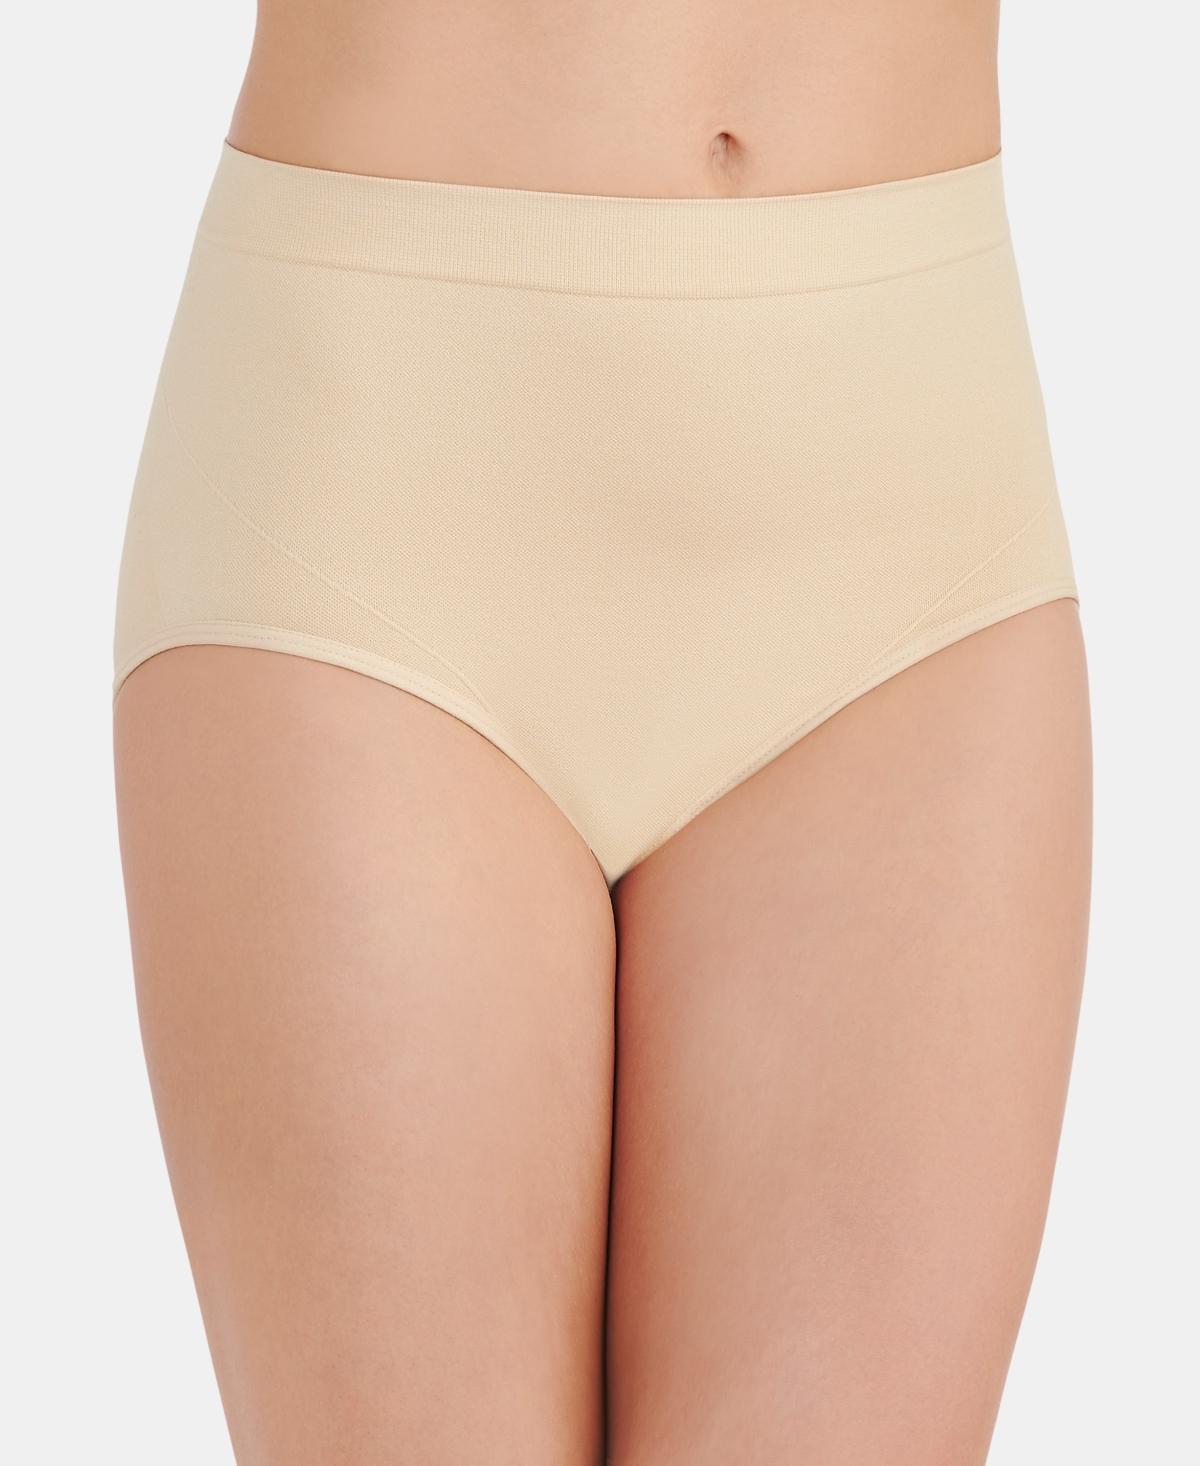 Seamless Smoothing Comfort Brief Underwear 13264, also available in extended sizes - Sheer Quartz